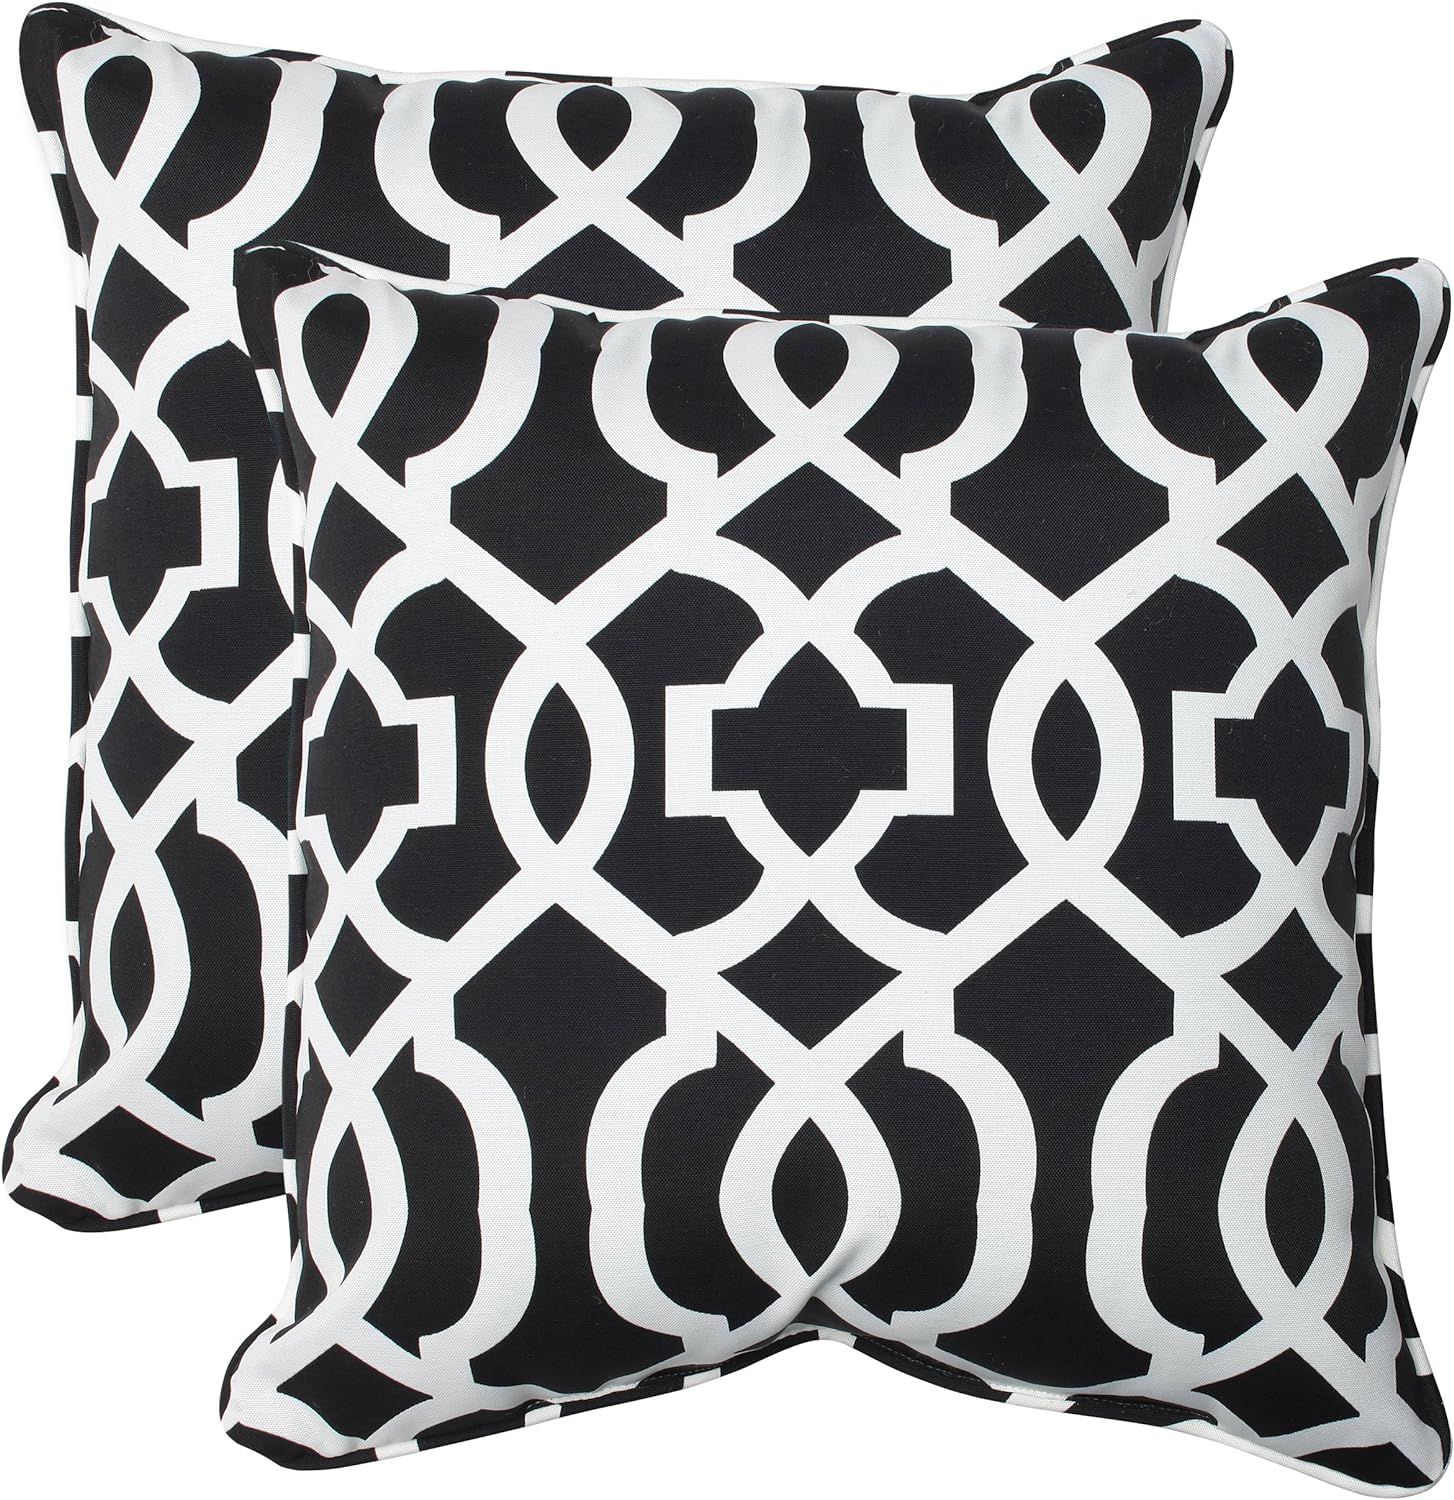 Pillow Perfect Outdoor/Indoor New Geo Throw Pillows, 18.5" x 18.5", Black/White, 2 Pack | Amazon (US)